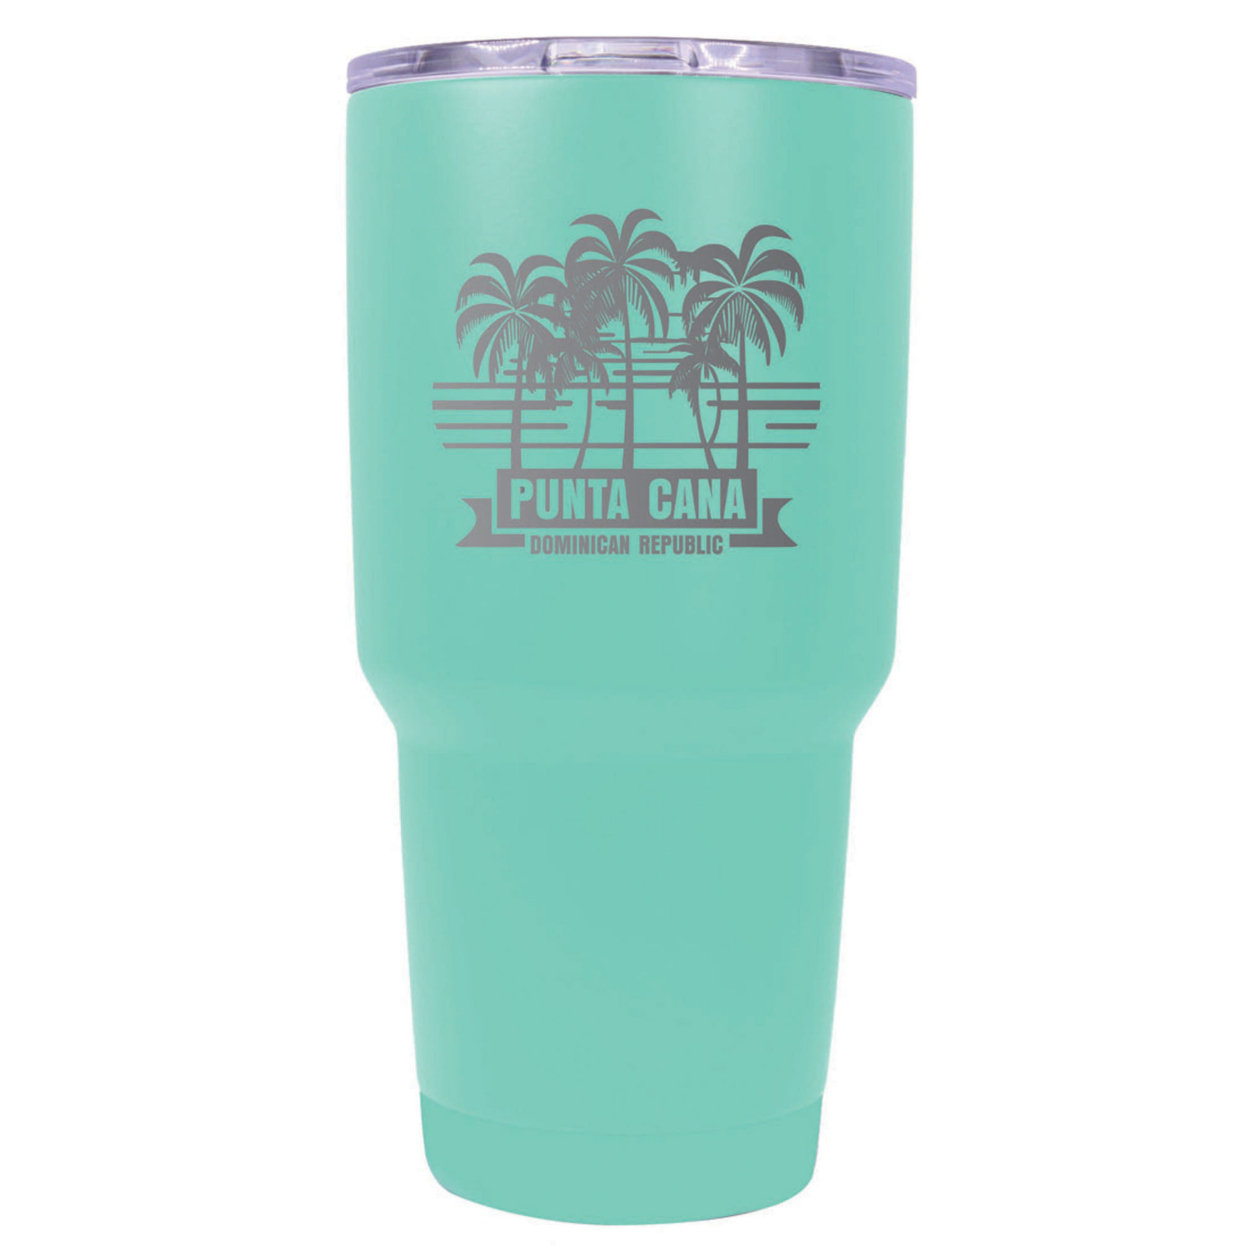 Punta Cana Dominican Republic Souvenir 24 Oz Insulated Stainless Steel Tumbler Etched - Green, PALM BEACH